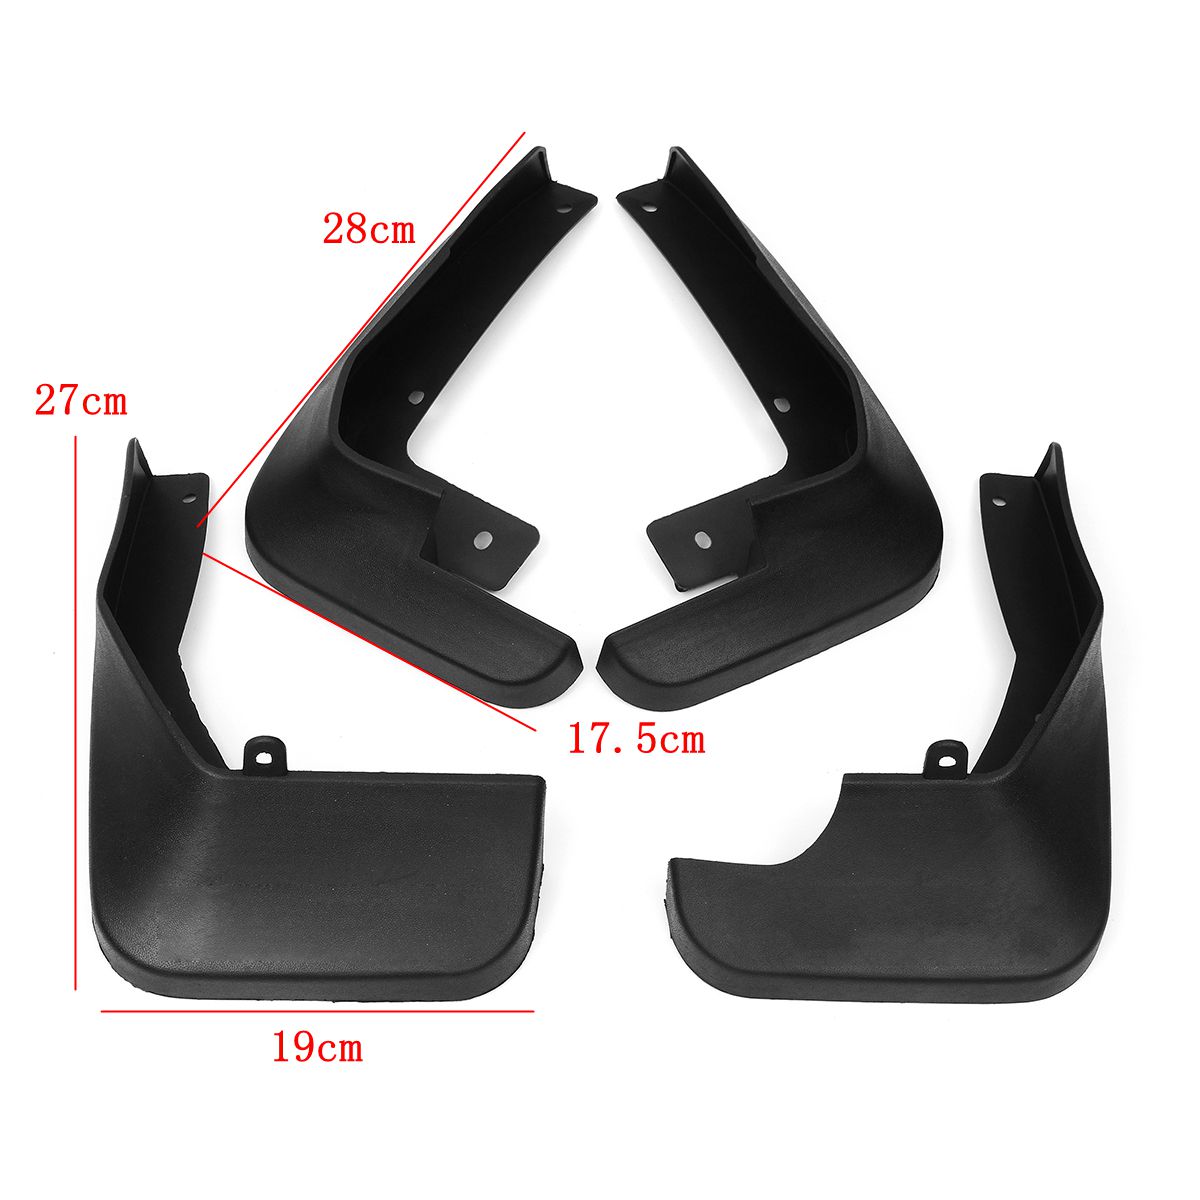 4Pcs-Front-And-Rear-Mud-Flaps-Car-Mudguards-For-HONDA-And-For-Odyssey-2014-2018-1425053